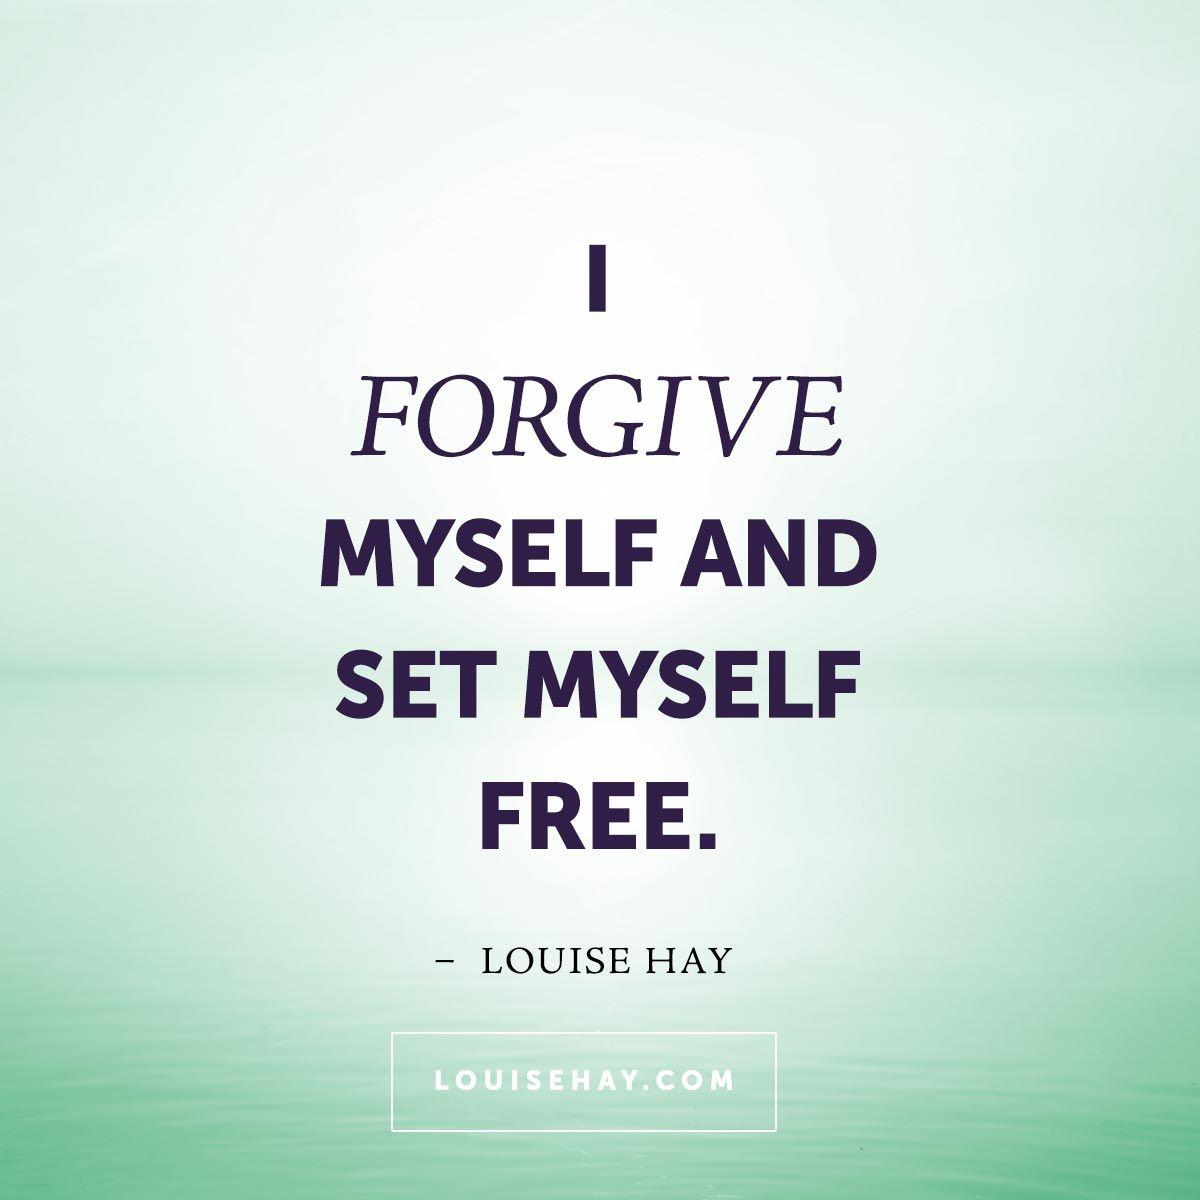 Daily Affirmations & Positive Quotes from. Louise hay